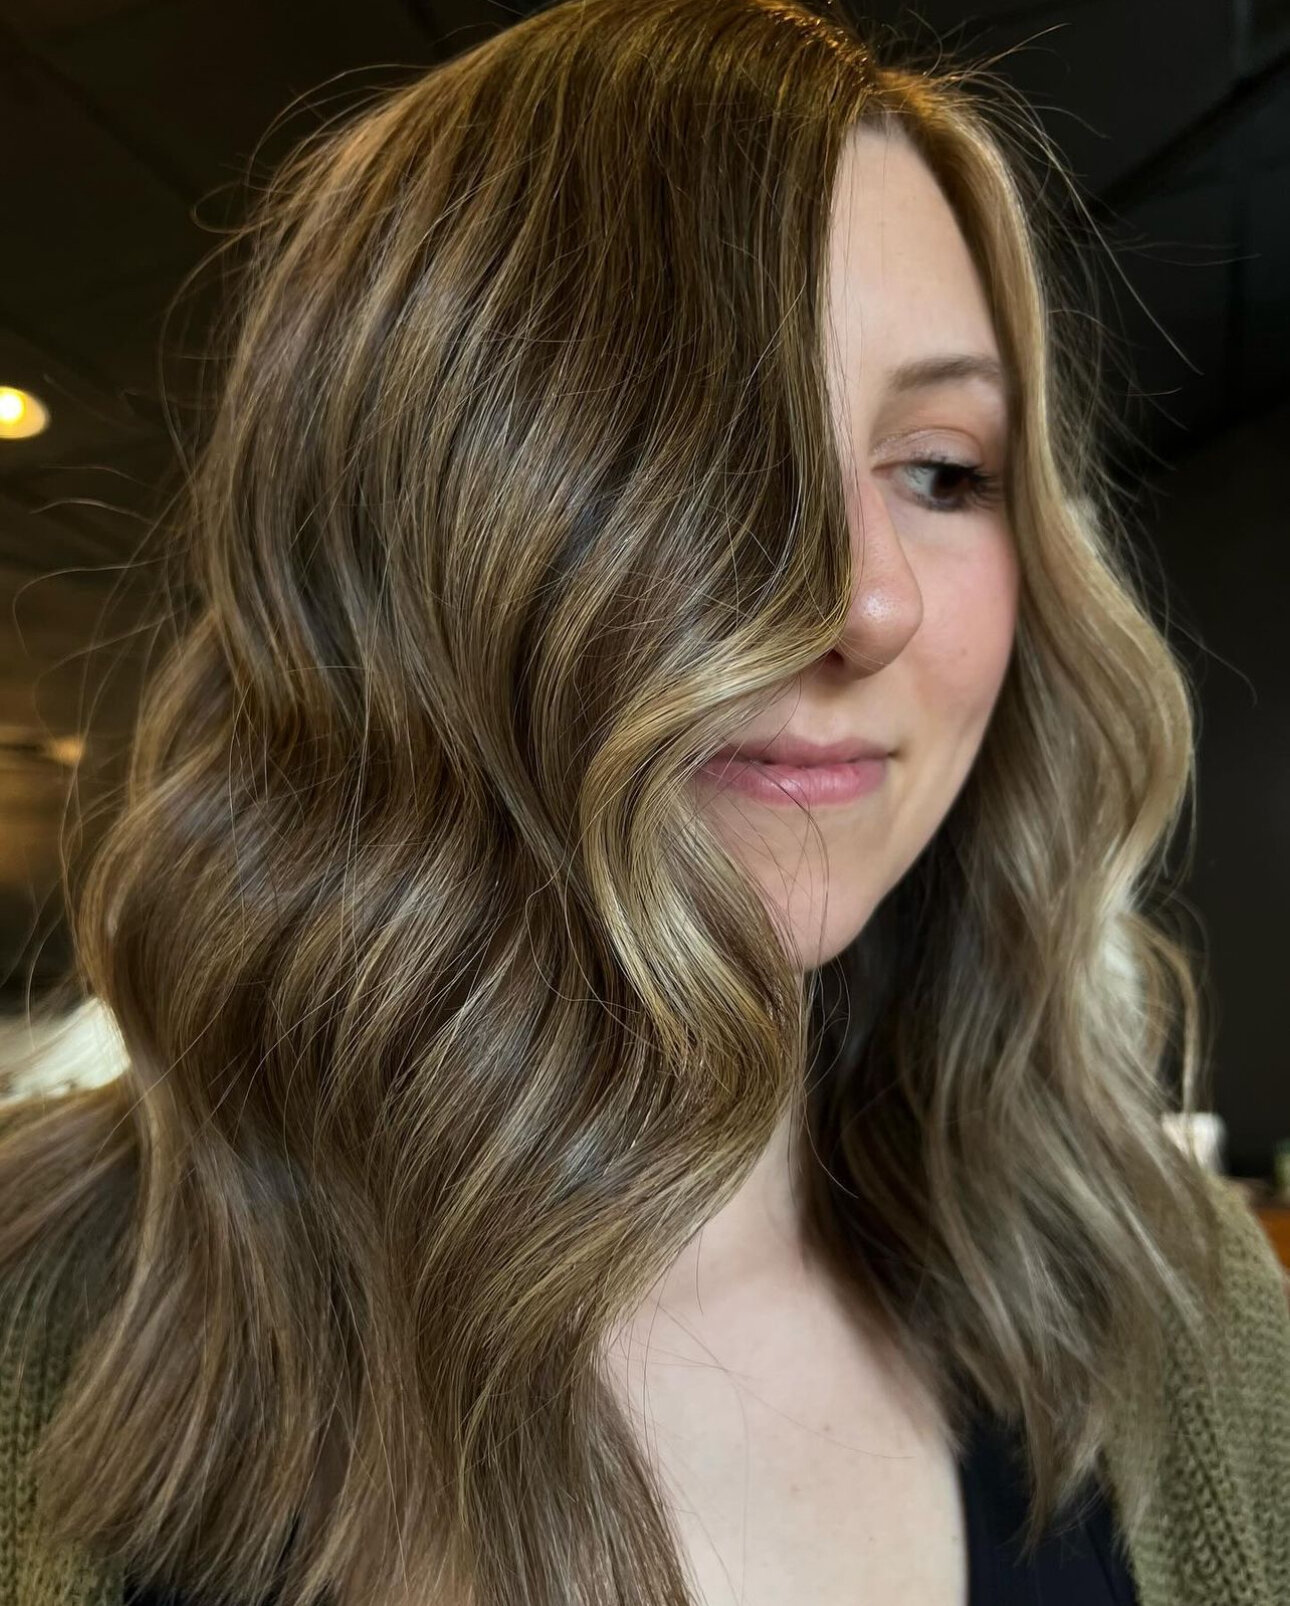 Want to have sun-kissed hair? Then read below ☀️👇🏼

Makala crafted the perfect sun-kissed look just in time for spring, on this client she decided to do a full foil, glaze, cut + style. 

❓Not sure if you should book a full or partial? Here are som